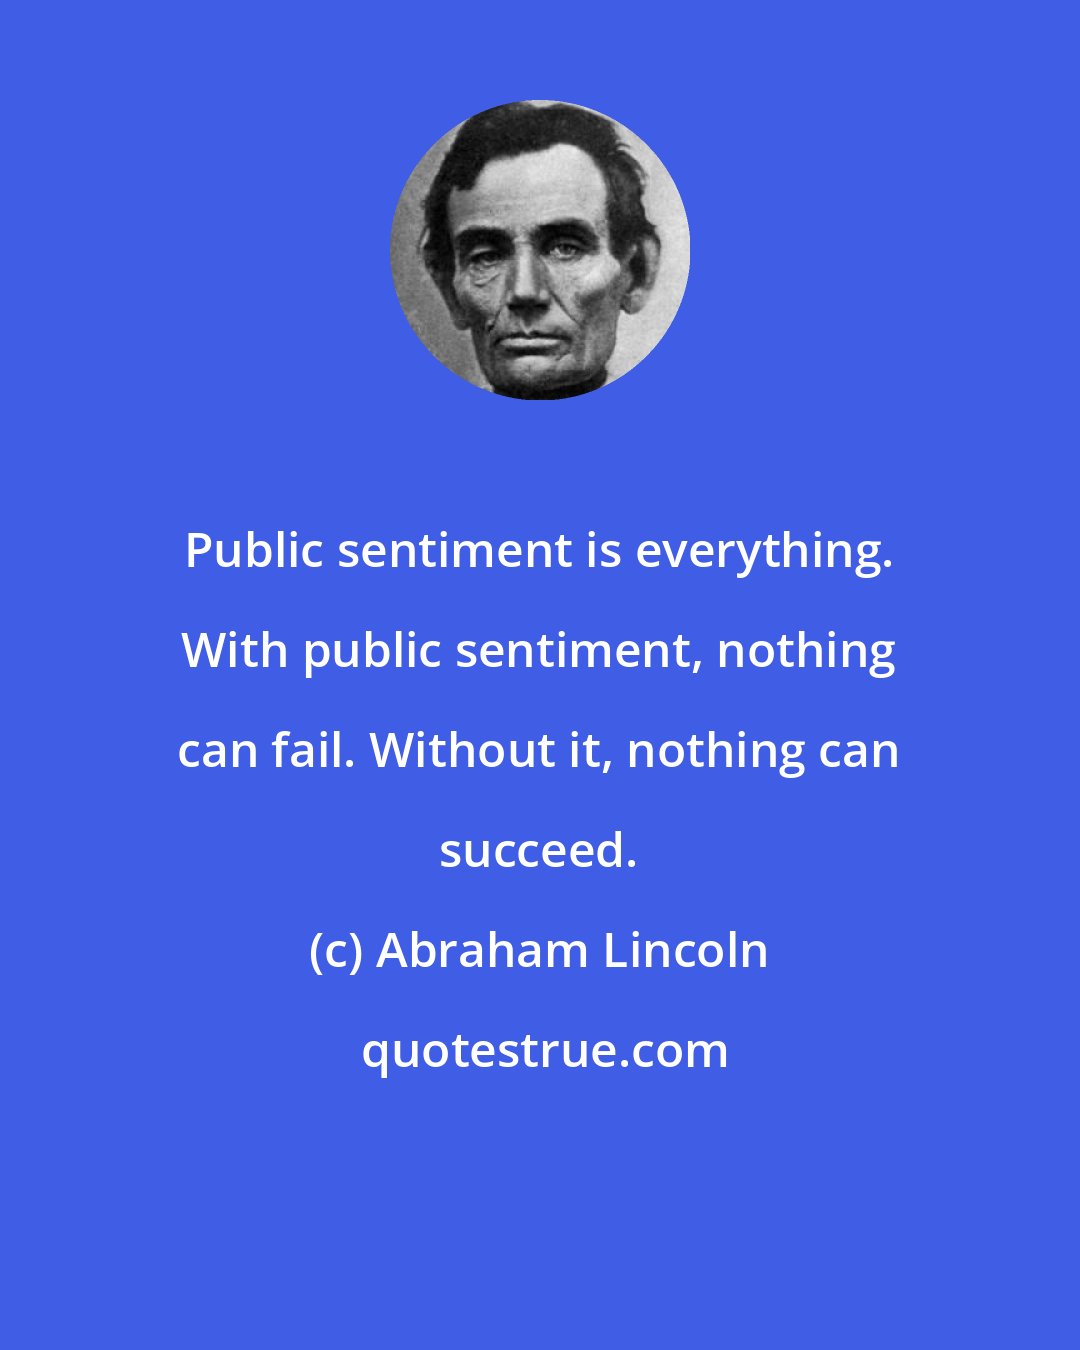 Abraham Lincoln: Public sentiment is everything. With public sentiment, nothing can fail. Without it, nothing can succeed.